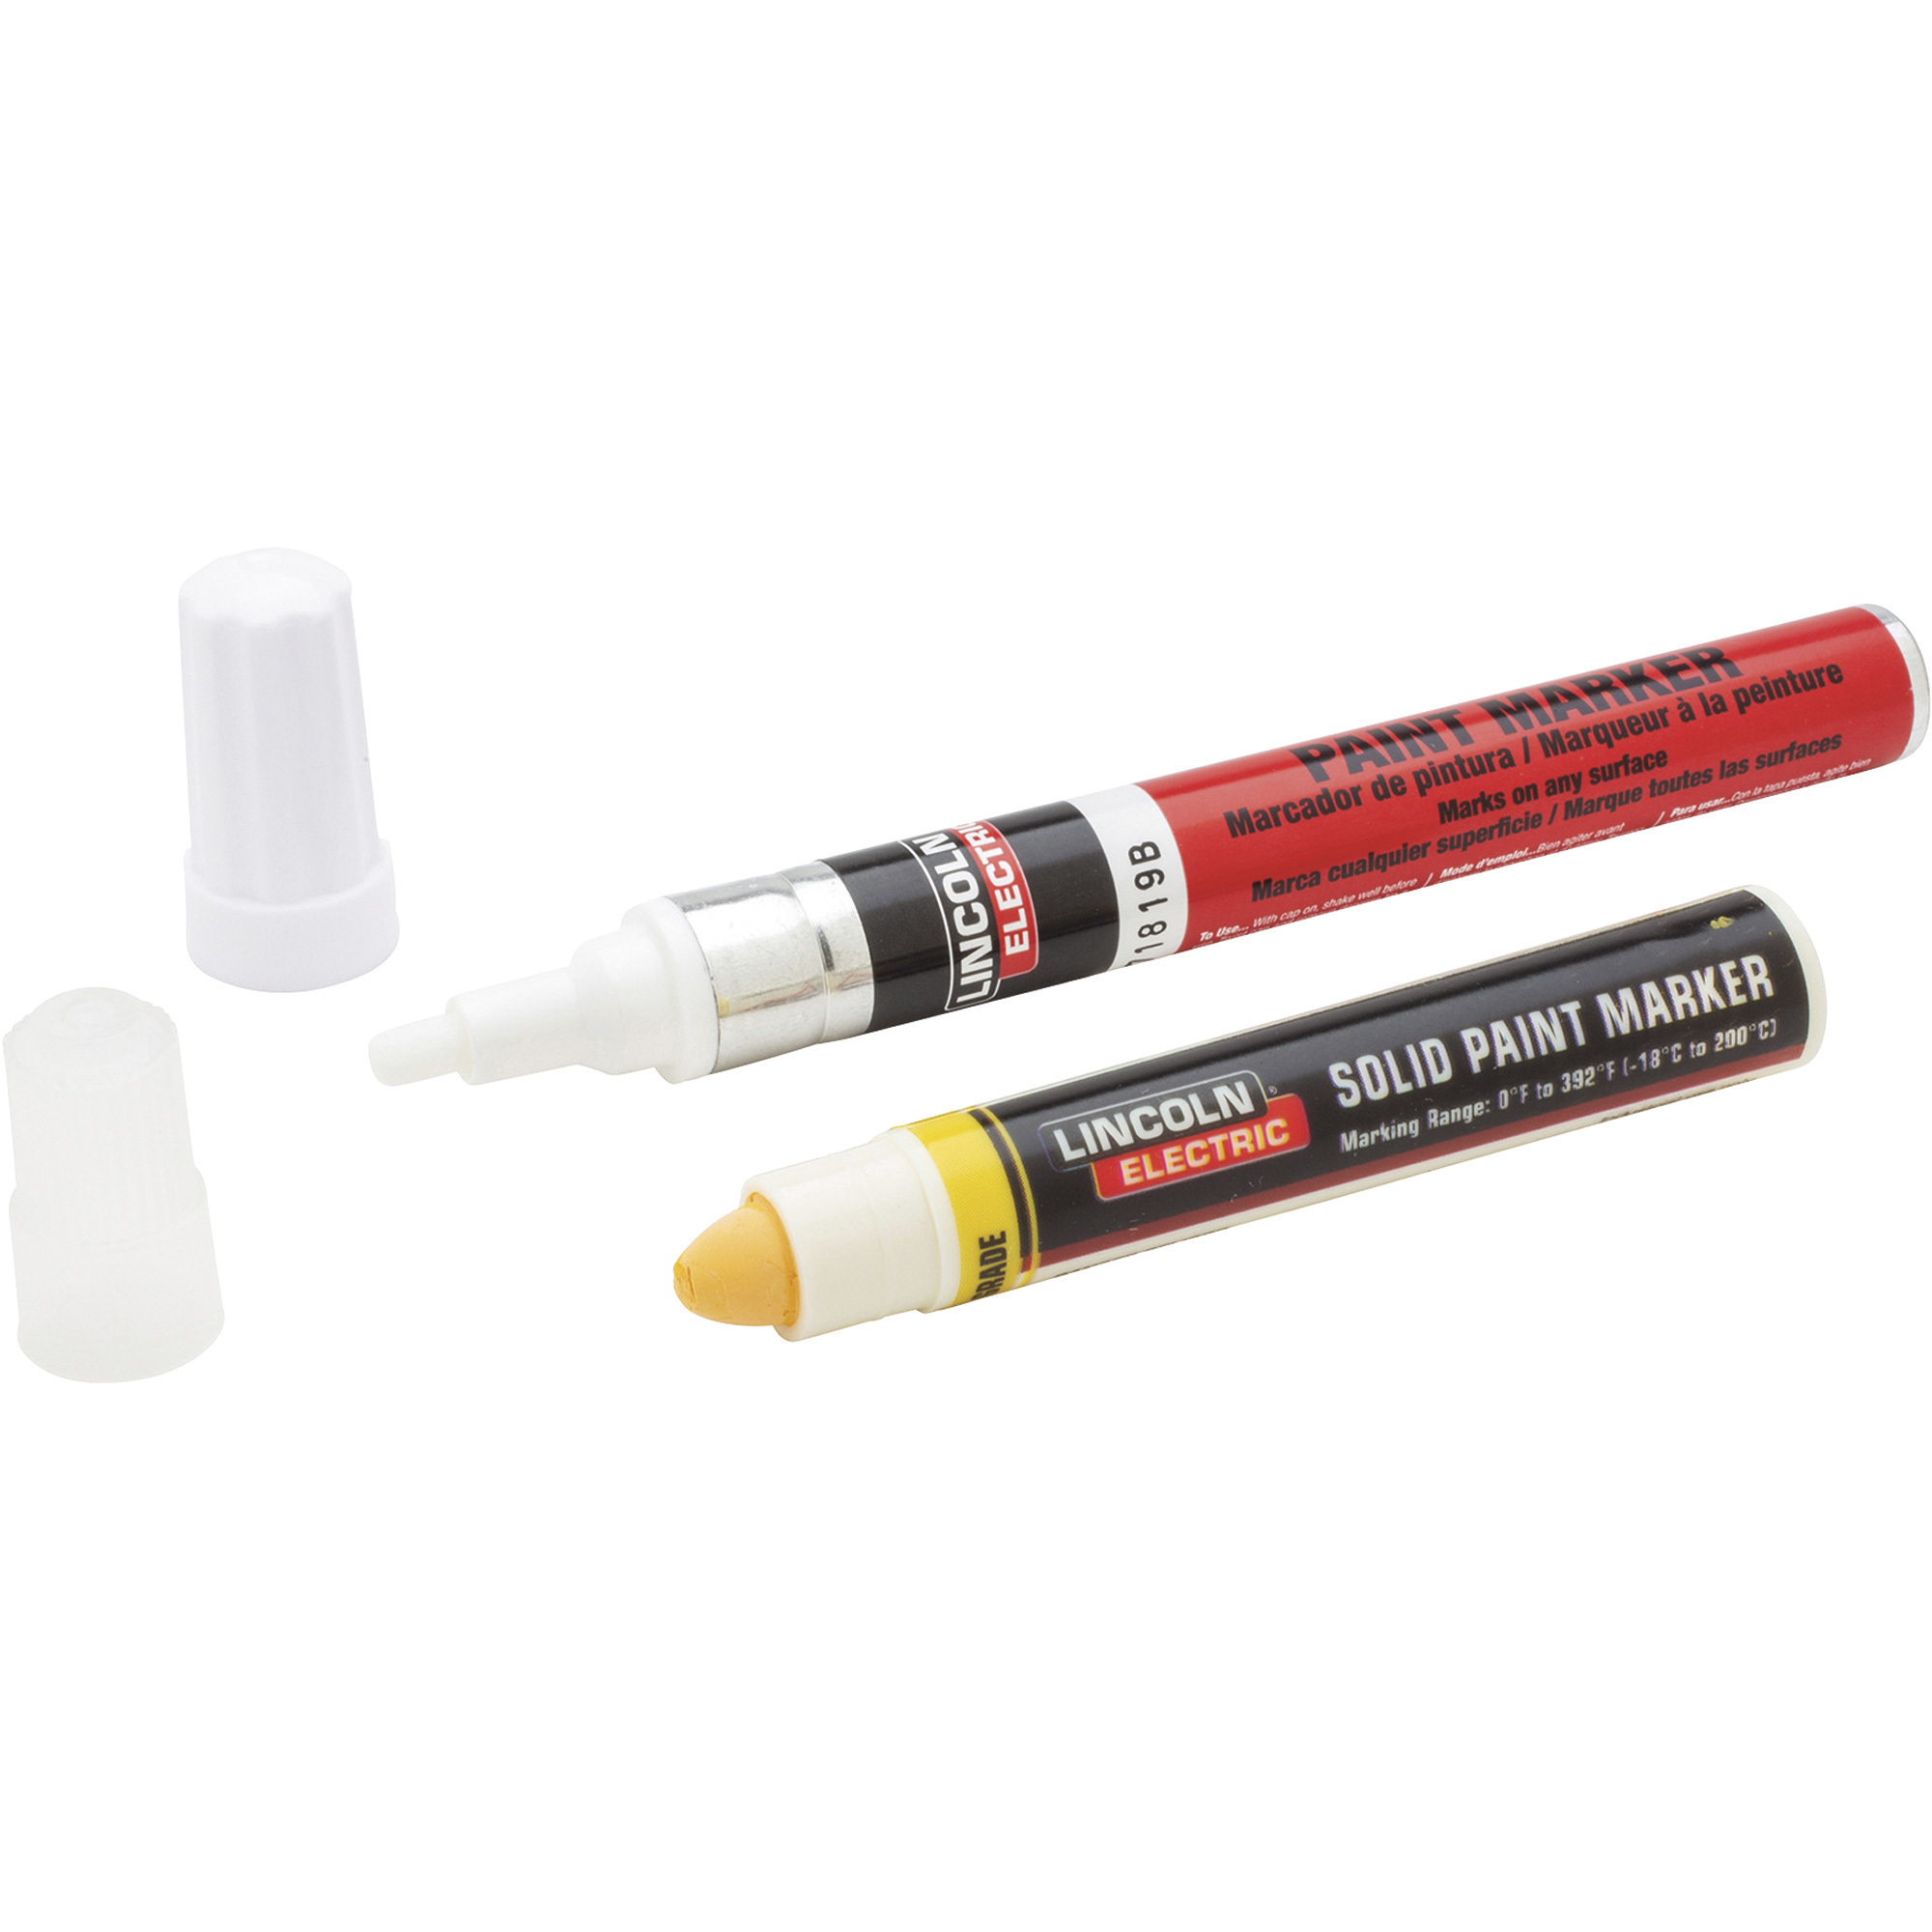 Lincoln Electric Paint Markers, 2-Ct. Pkg., White and Yellow, Model KH982